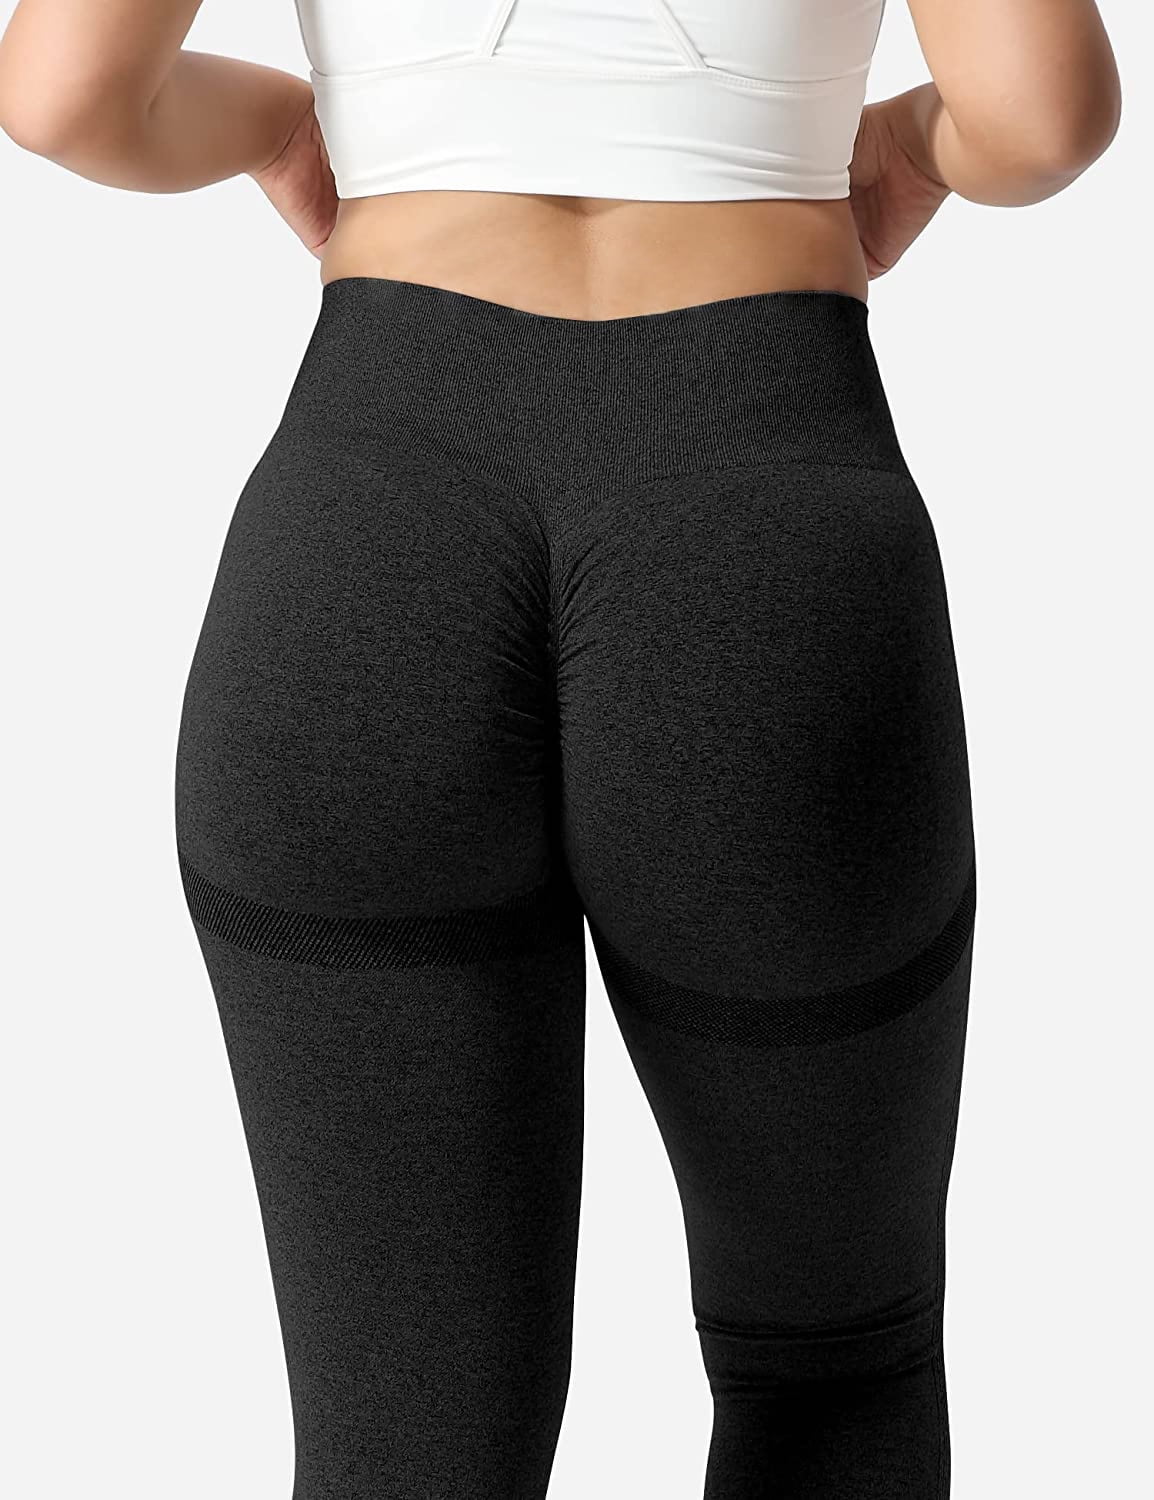 High Waisted Leggings with Pockets for Women: LifeSky Tummy Control Buttery  Soft Athletic Workout Butt Capris, 5217 Black, M price in UAE,  UAE